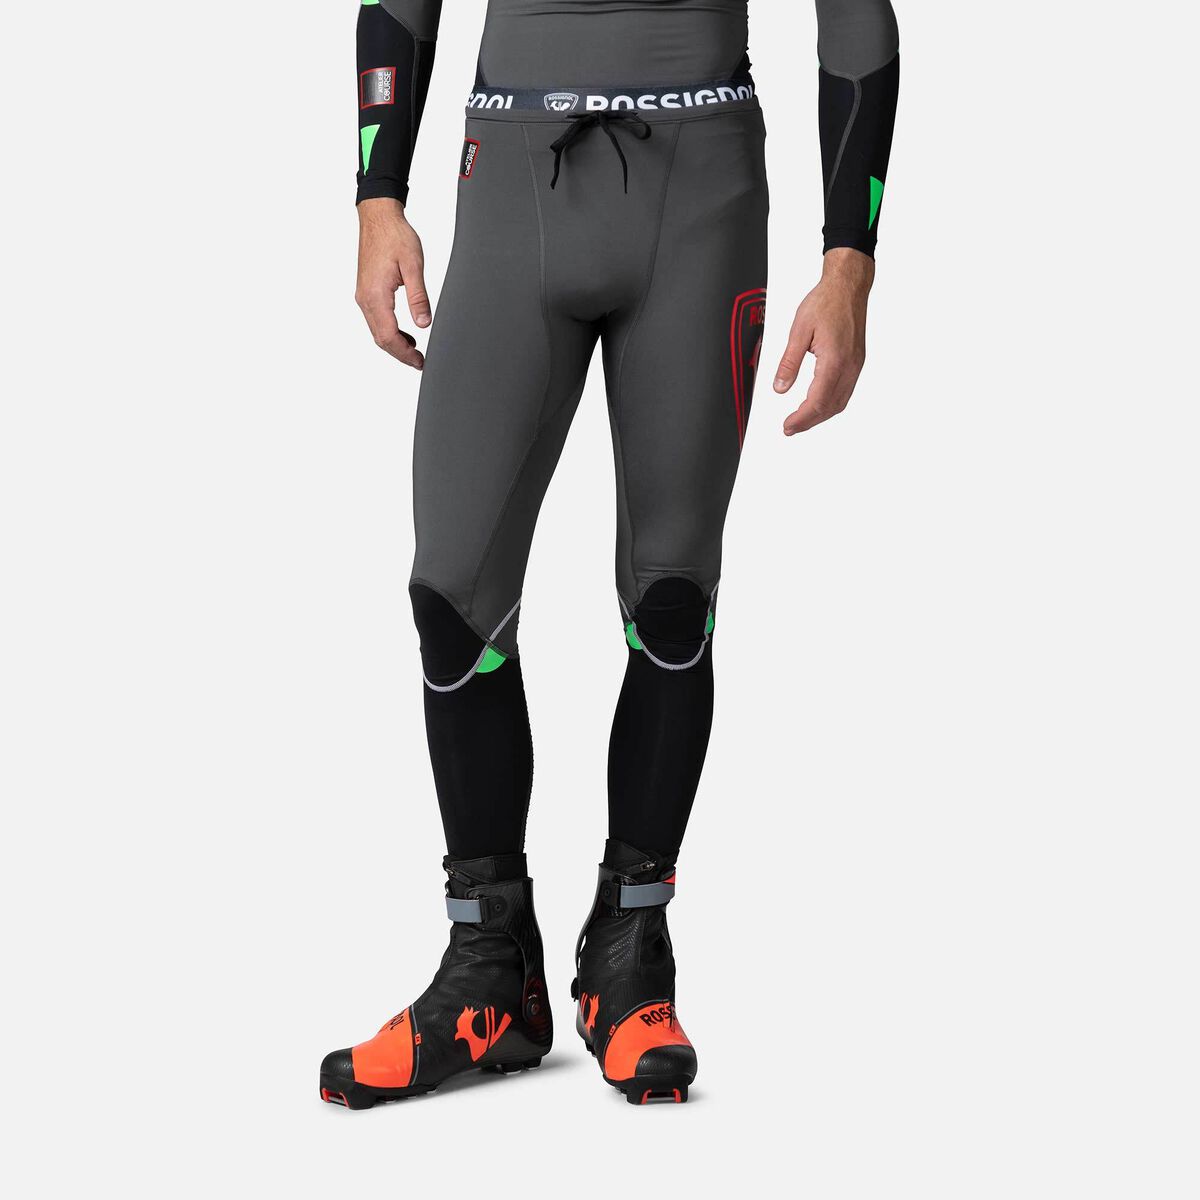 SKINS Launch Latest Range of Compression Gear – The DNAmic Range!